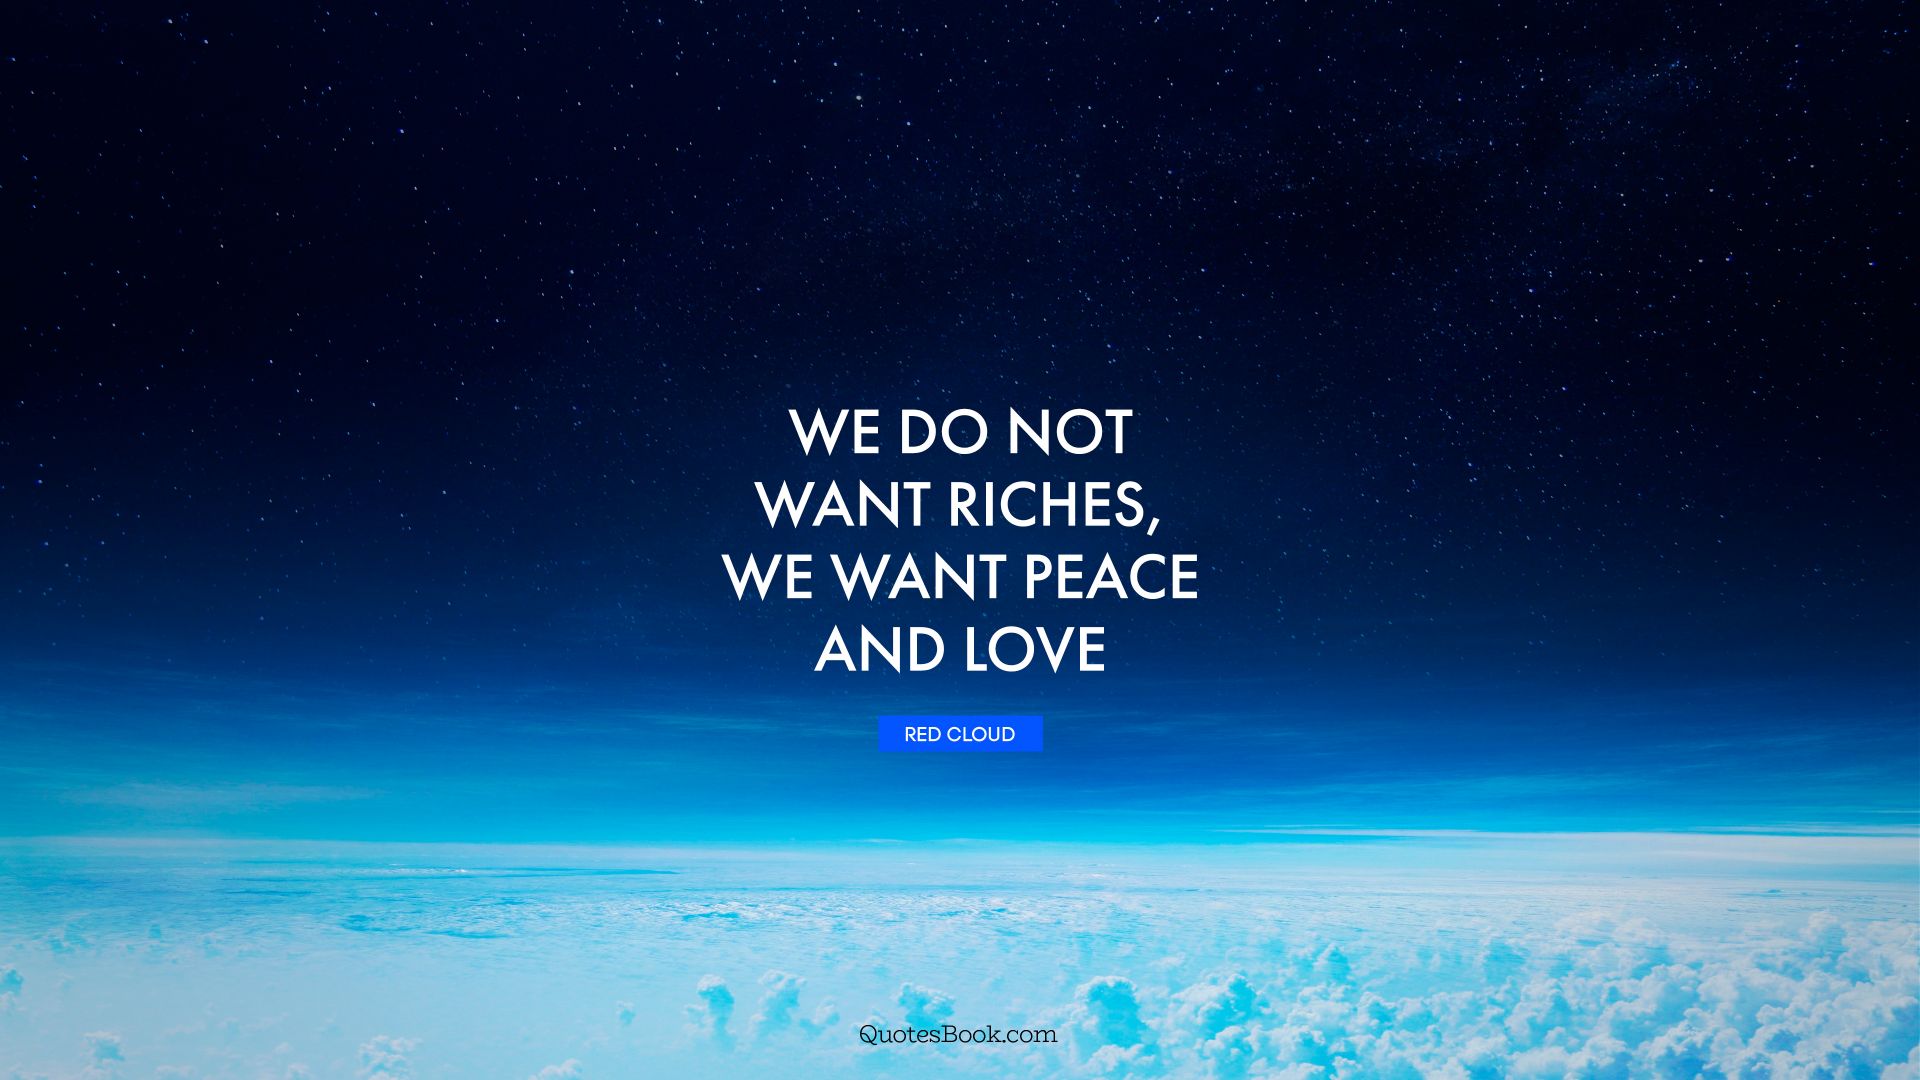 We do not want riches, we want peace and love. - Quote by Red Cloud